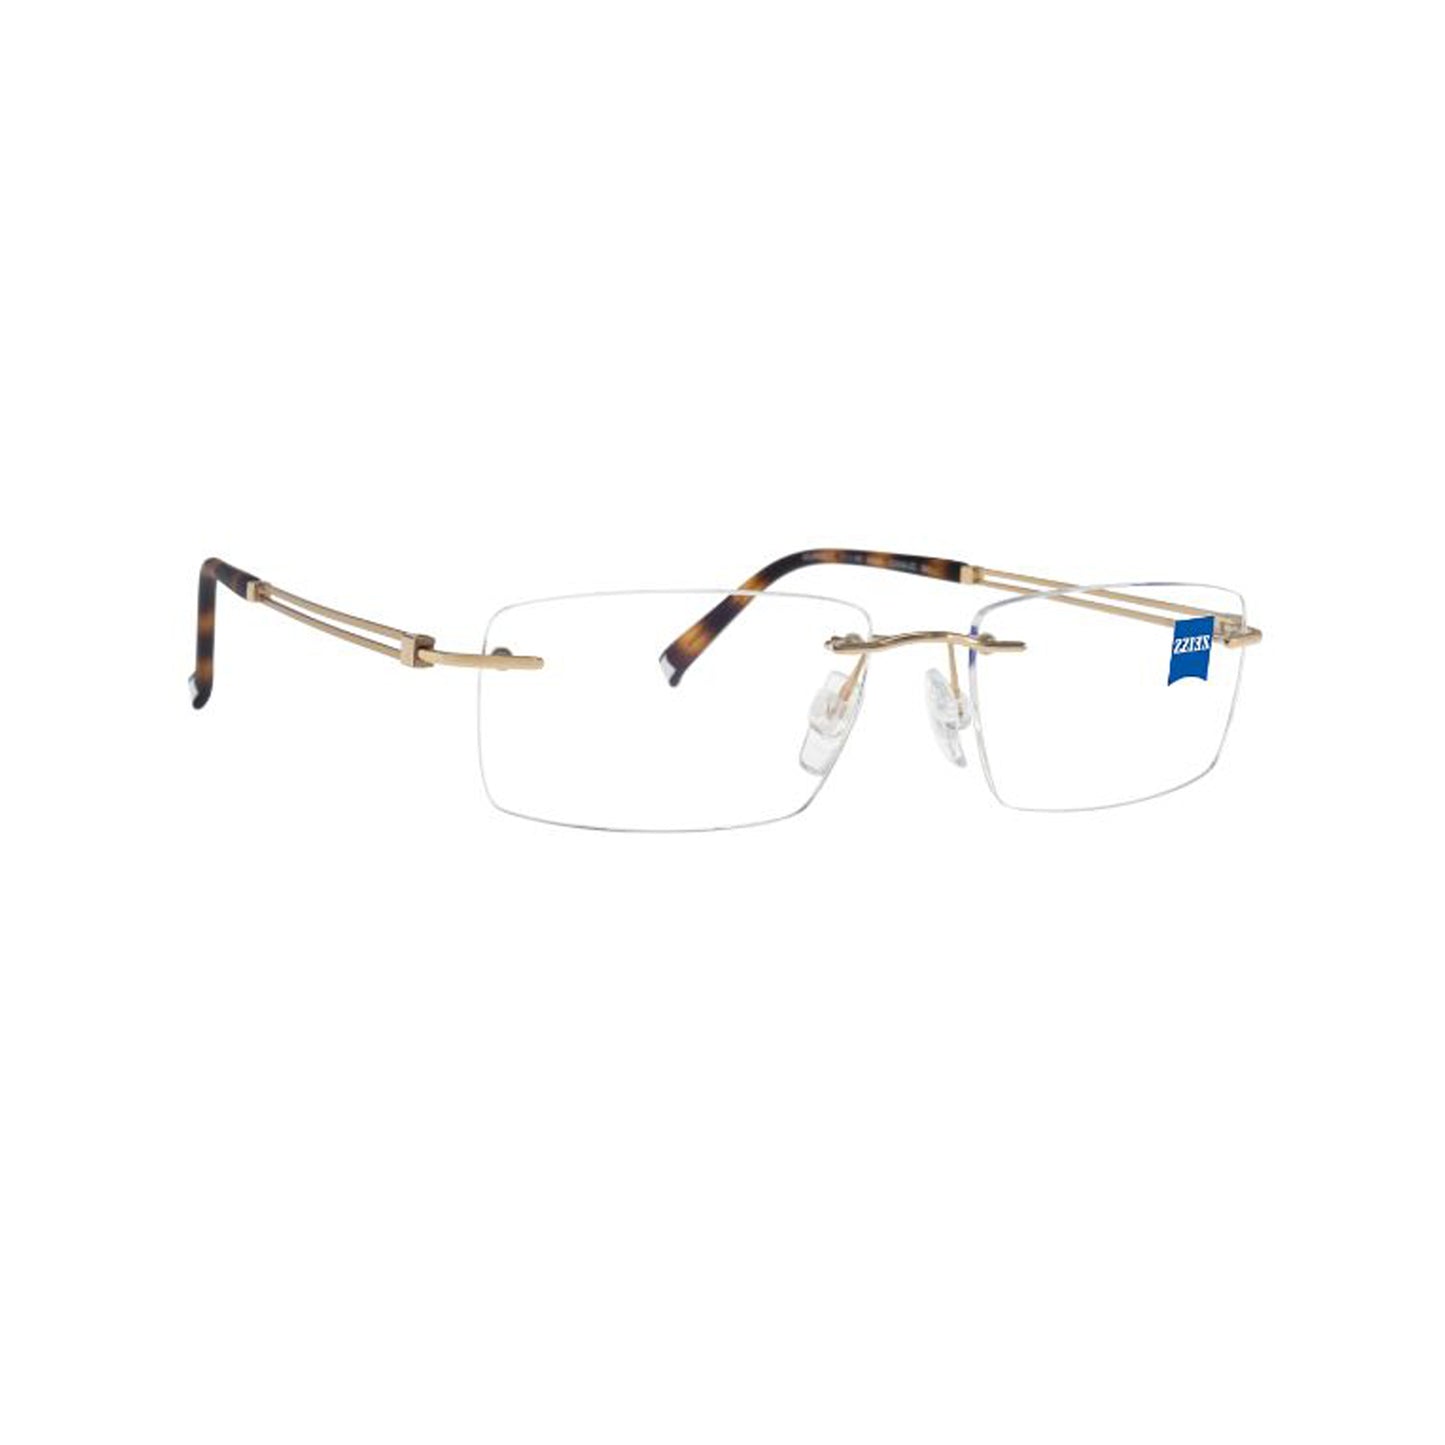 Zeiss Eyewear Gold Rectangle Metal Rimless Eyeglasses. Made in Germany ZS60002-Y22